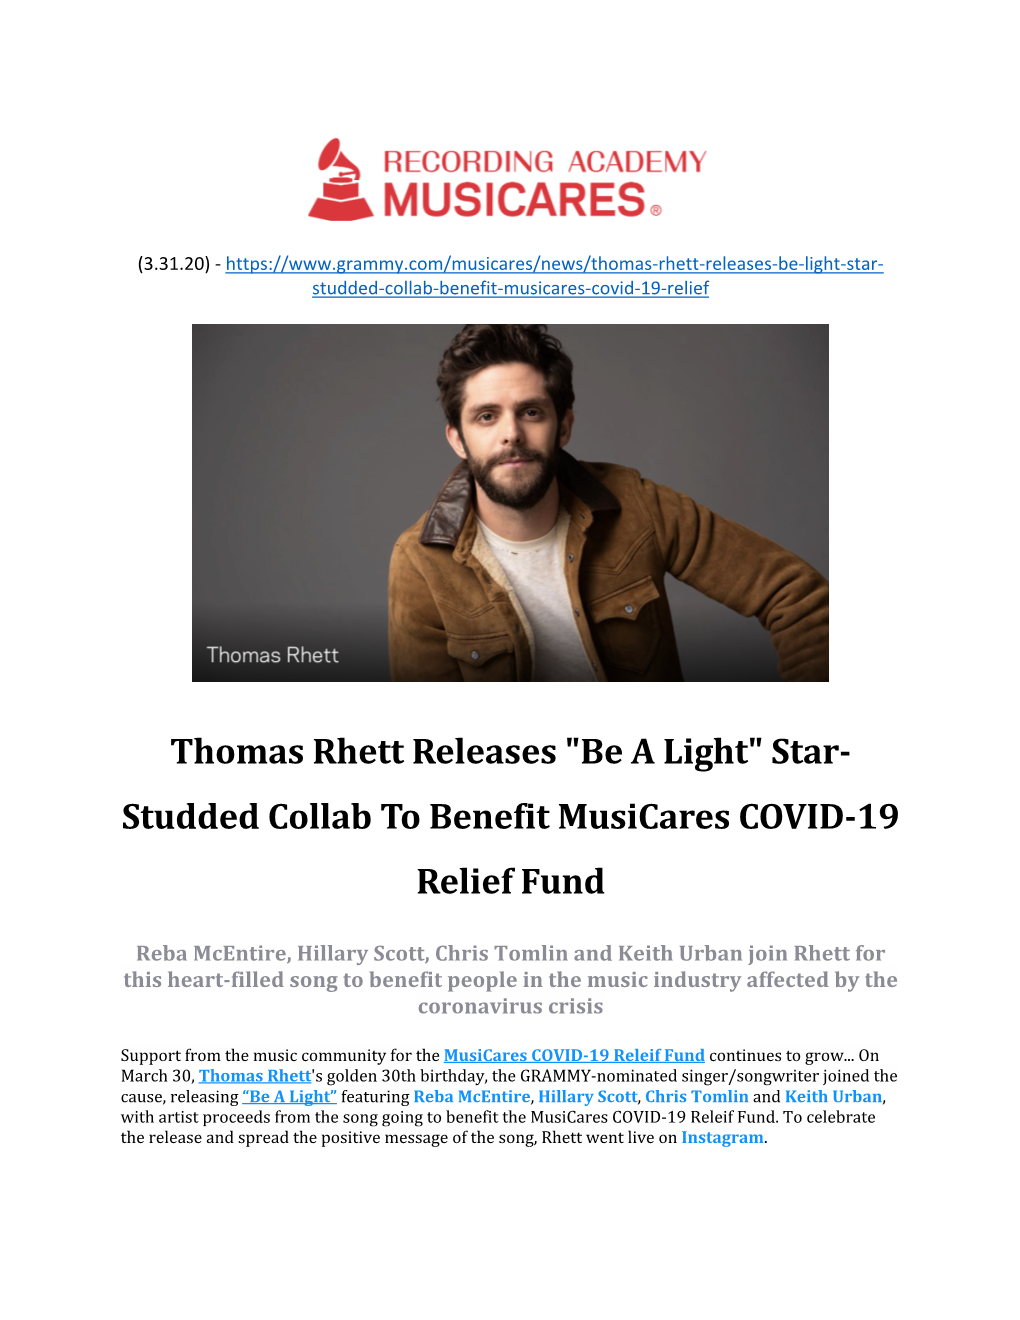 "Be a Light" Star- Studded Collab to Benefit Musicares COVID-19 Relief Fund